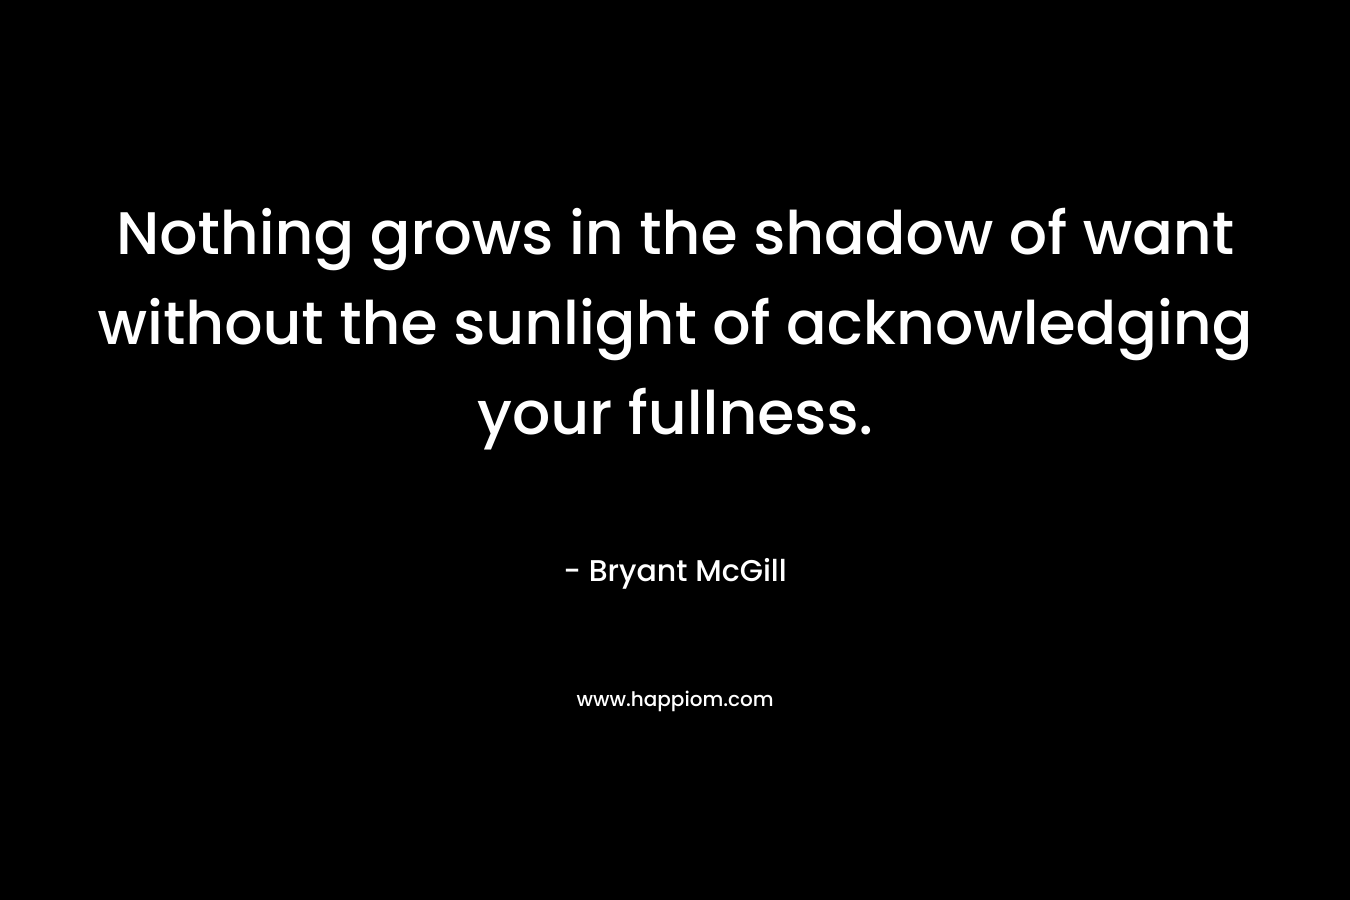 Nothing grows in the shadow of want without the sunlight of acknowledging your fullness. – Bryant McGill